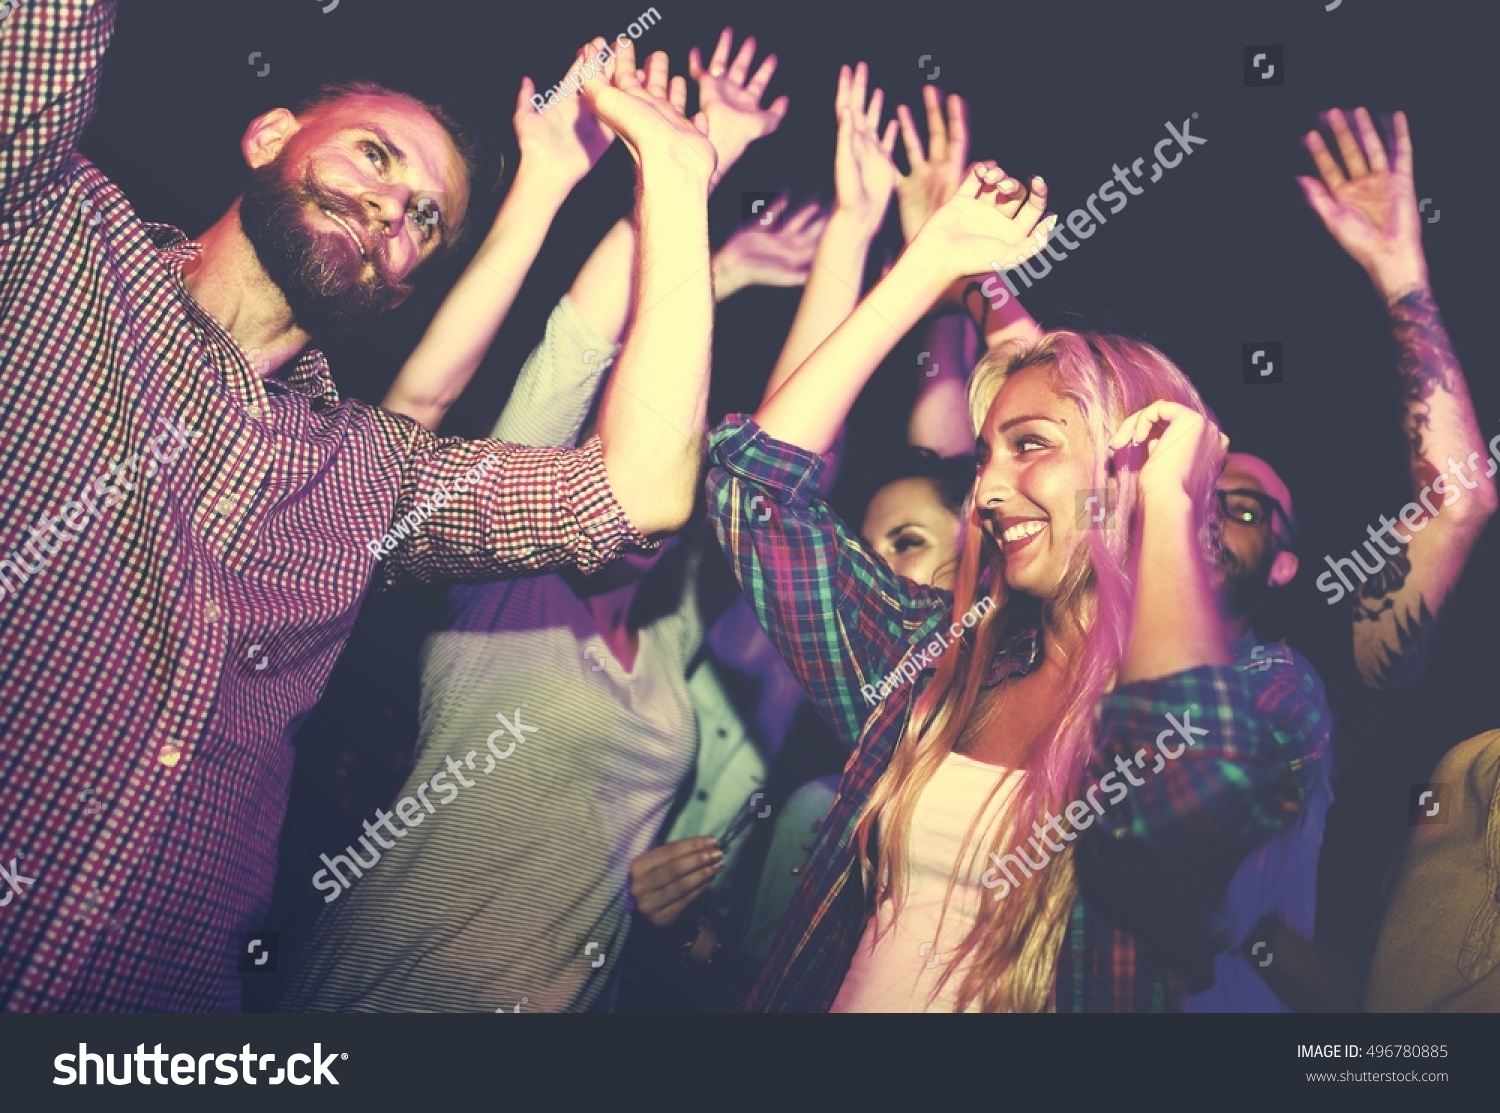 Group Of People Dancing Concept Stock Photo 496780885 : Shutterstock